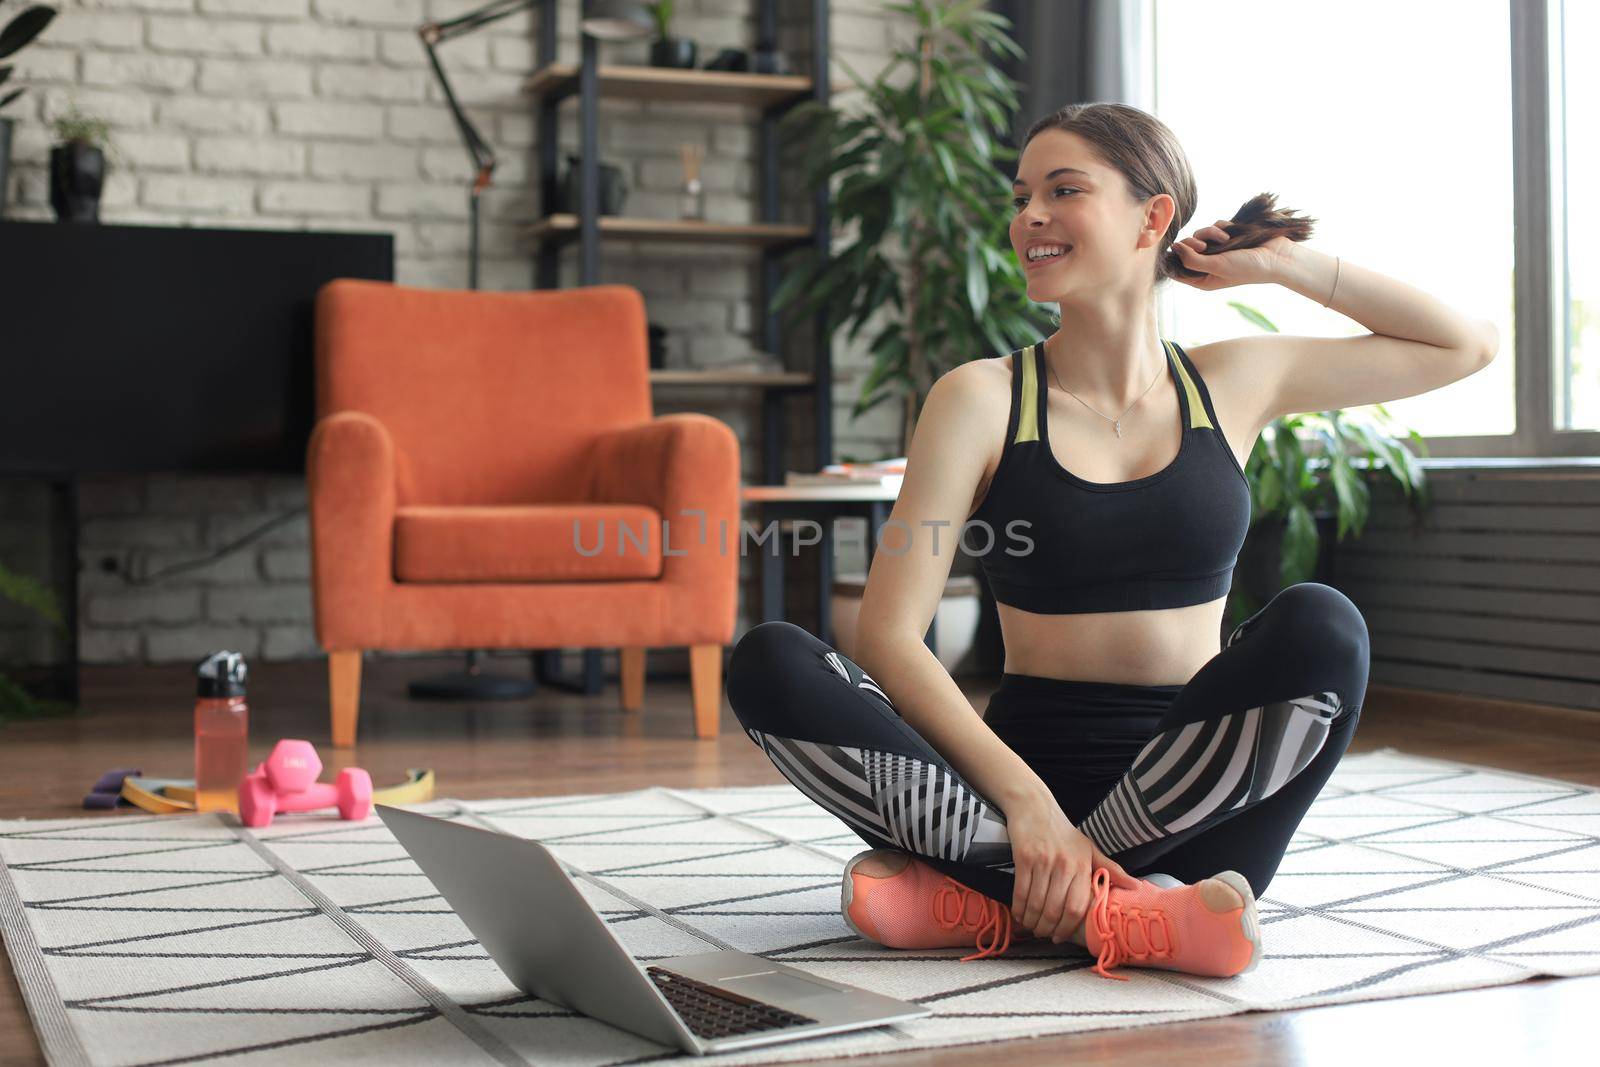 Fitness beautiful slim woman is sitting on the floor with dumbbells and bottle of water using laptop at home in the living room. Stay at home activities